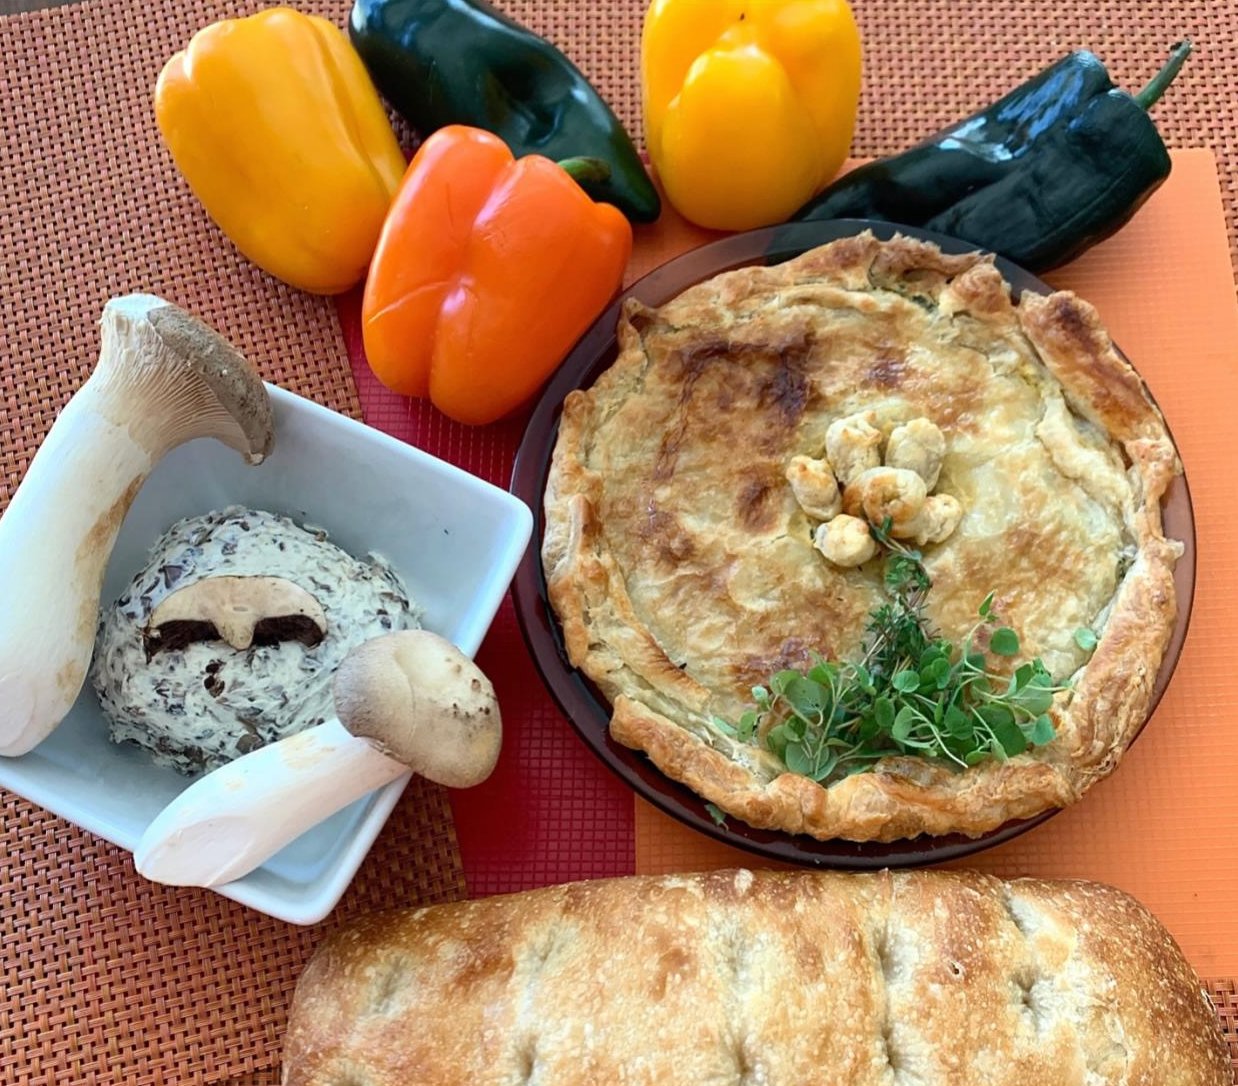 Mushroom Paté, left, and a Savory Ricotta Tart will impress your houseguests but are surprisingly easy to make.